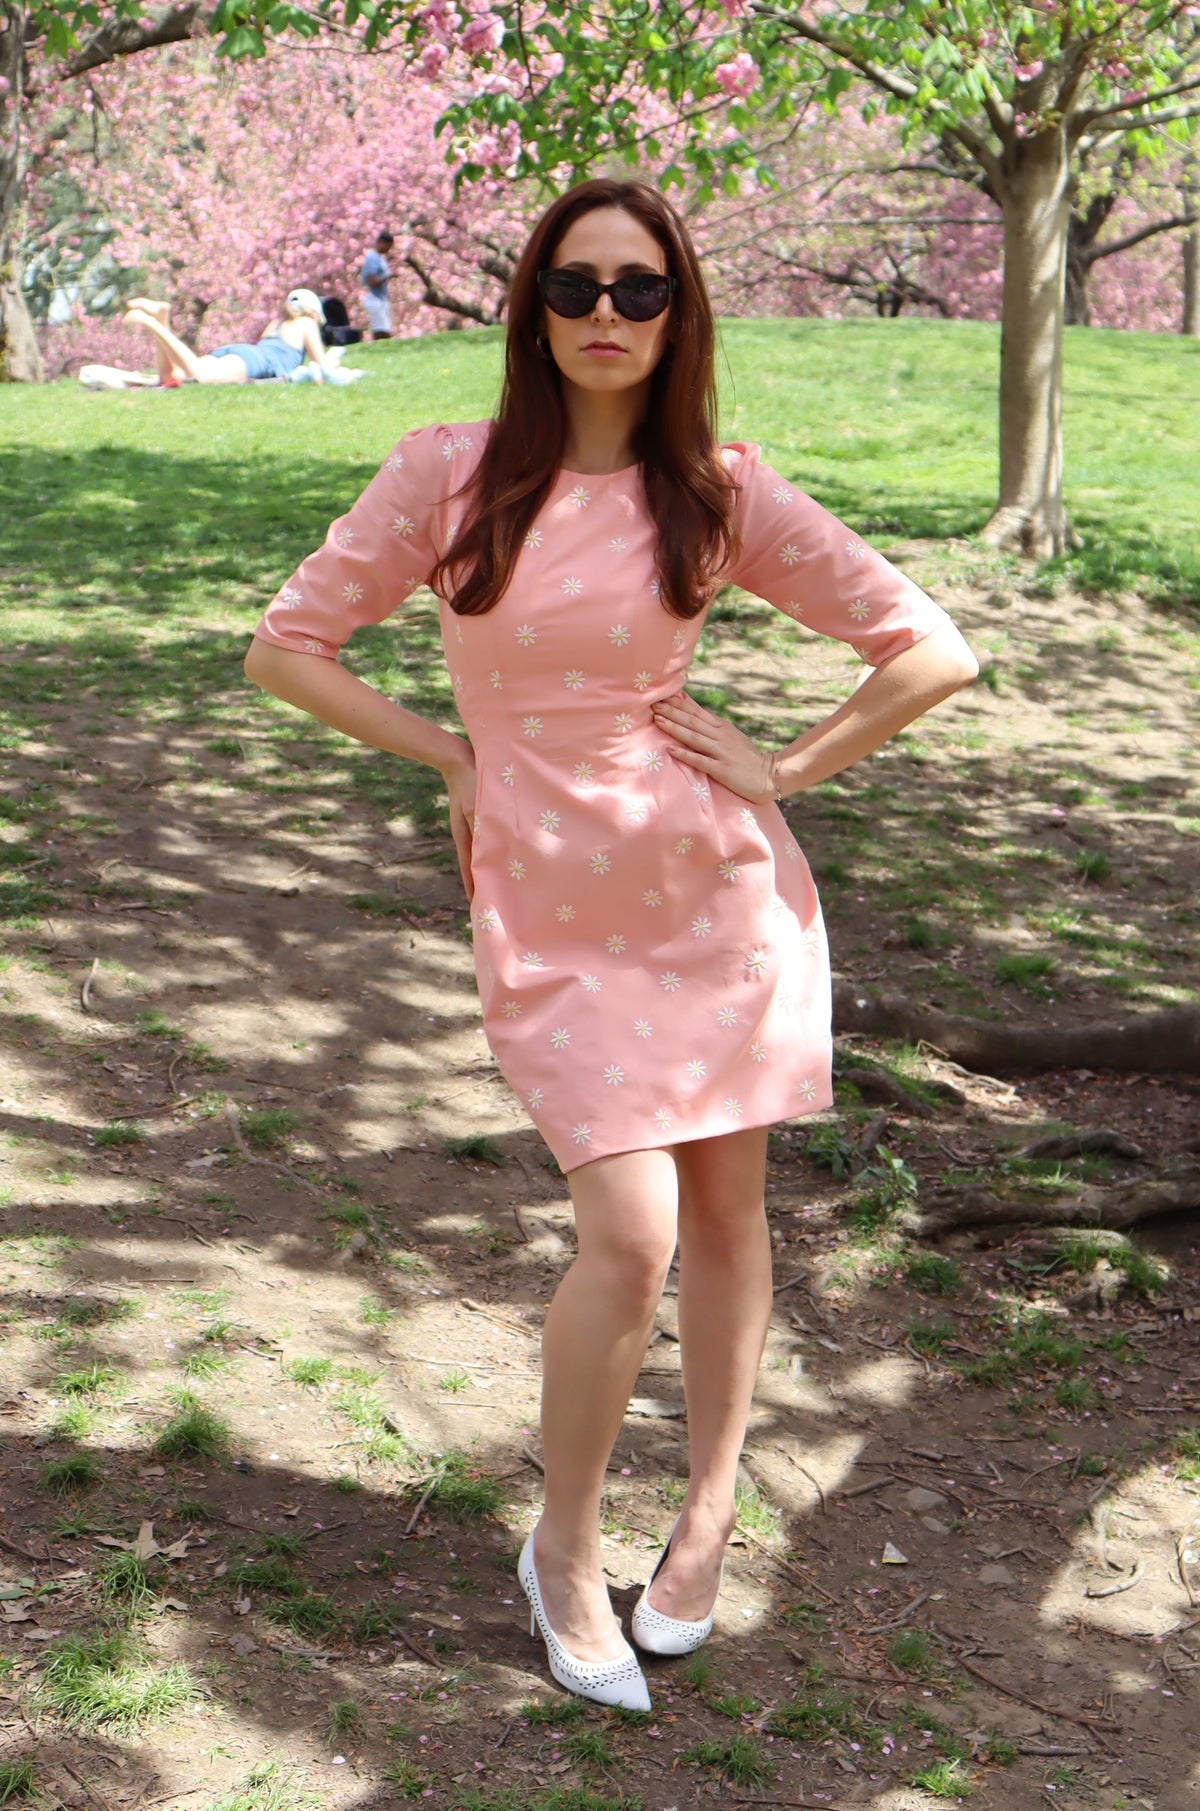 Model in peachy pink short dress with white daisy appliques looking forward in front of a cherry tree.